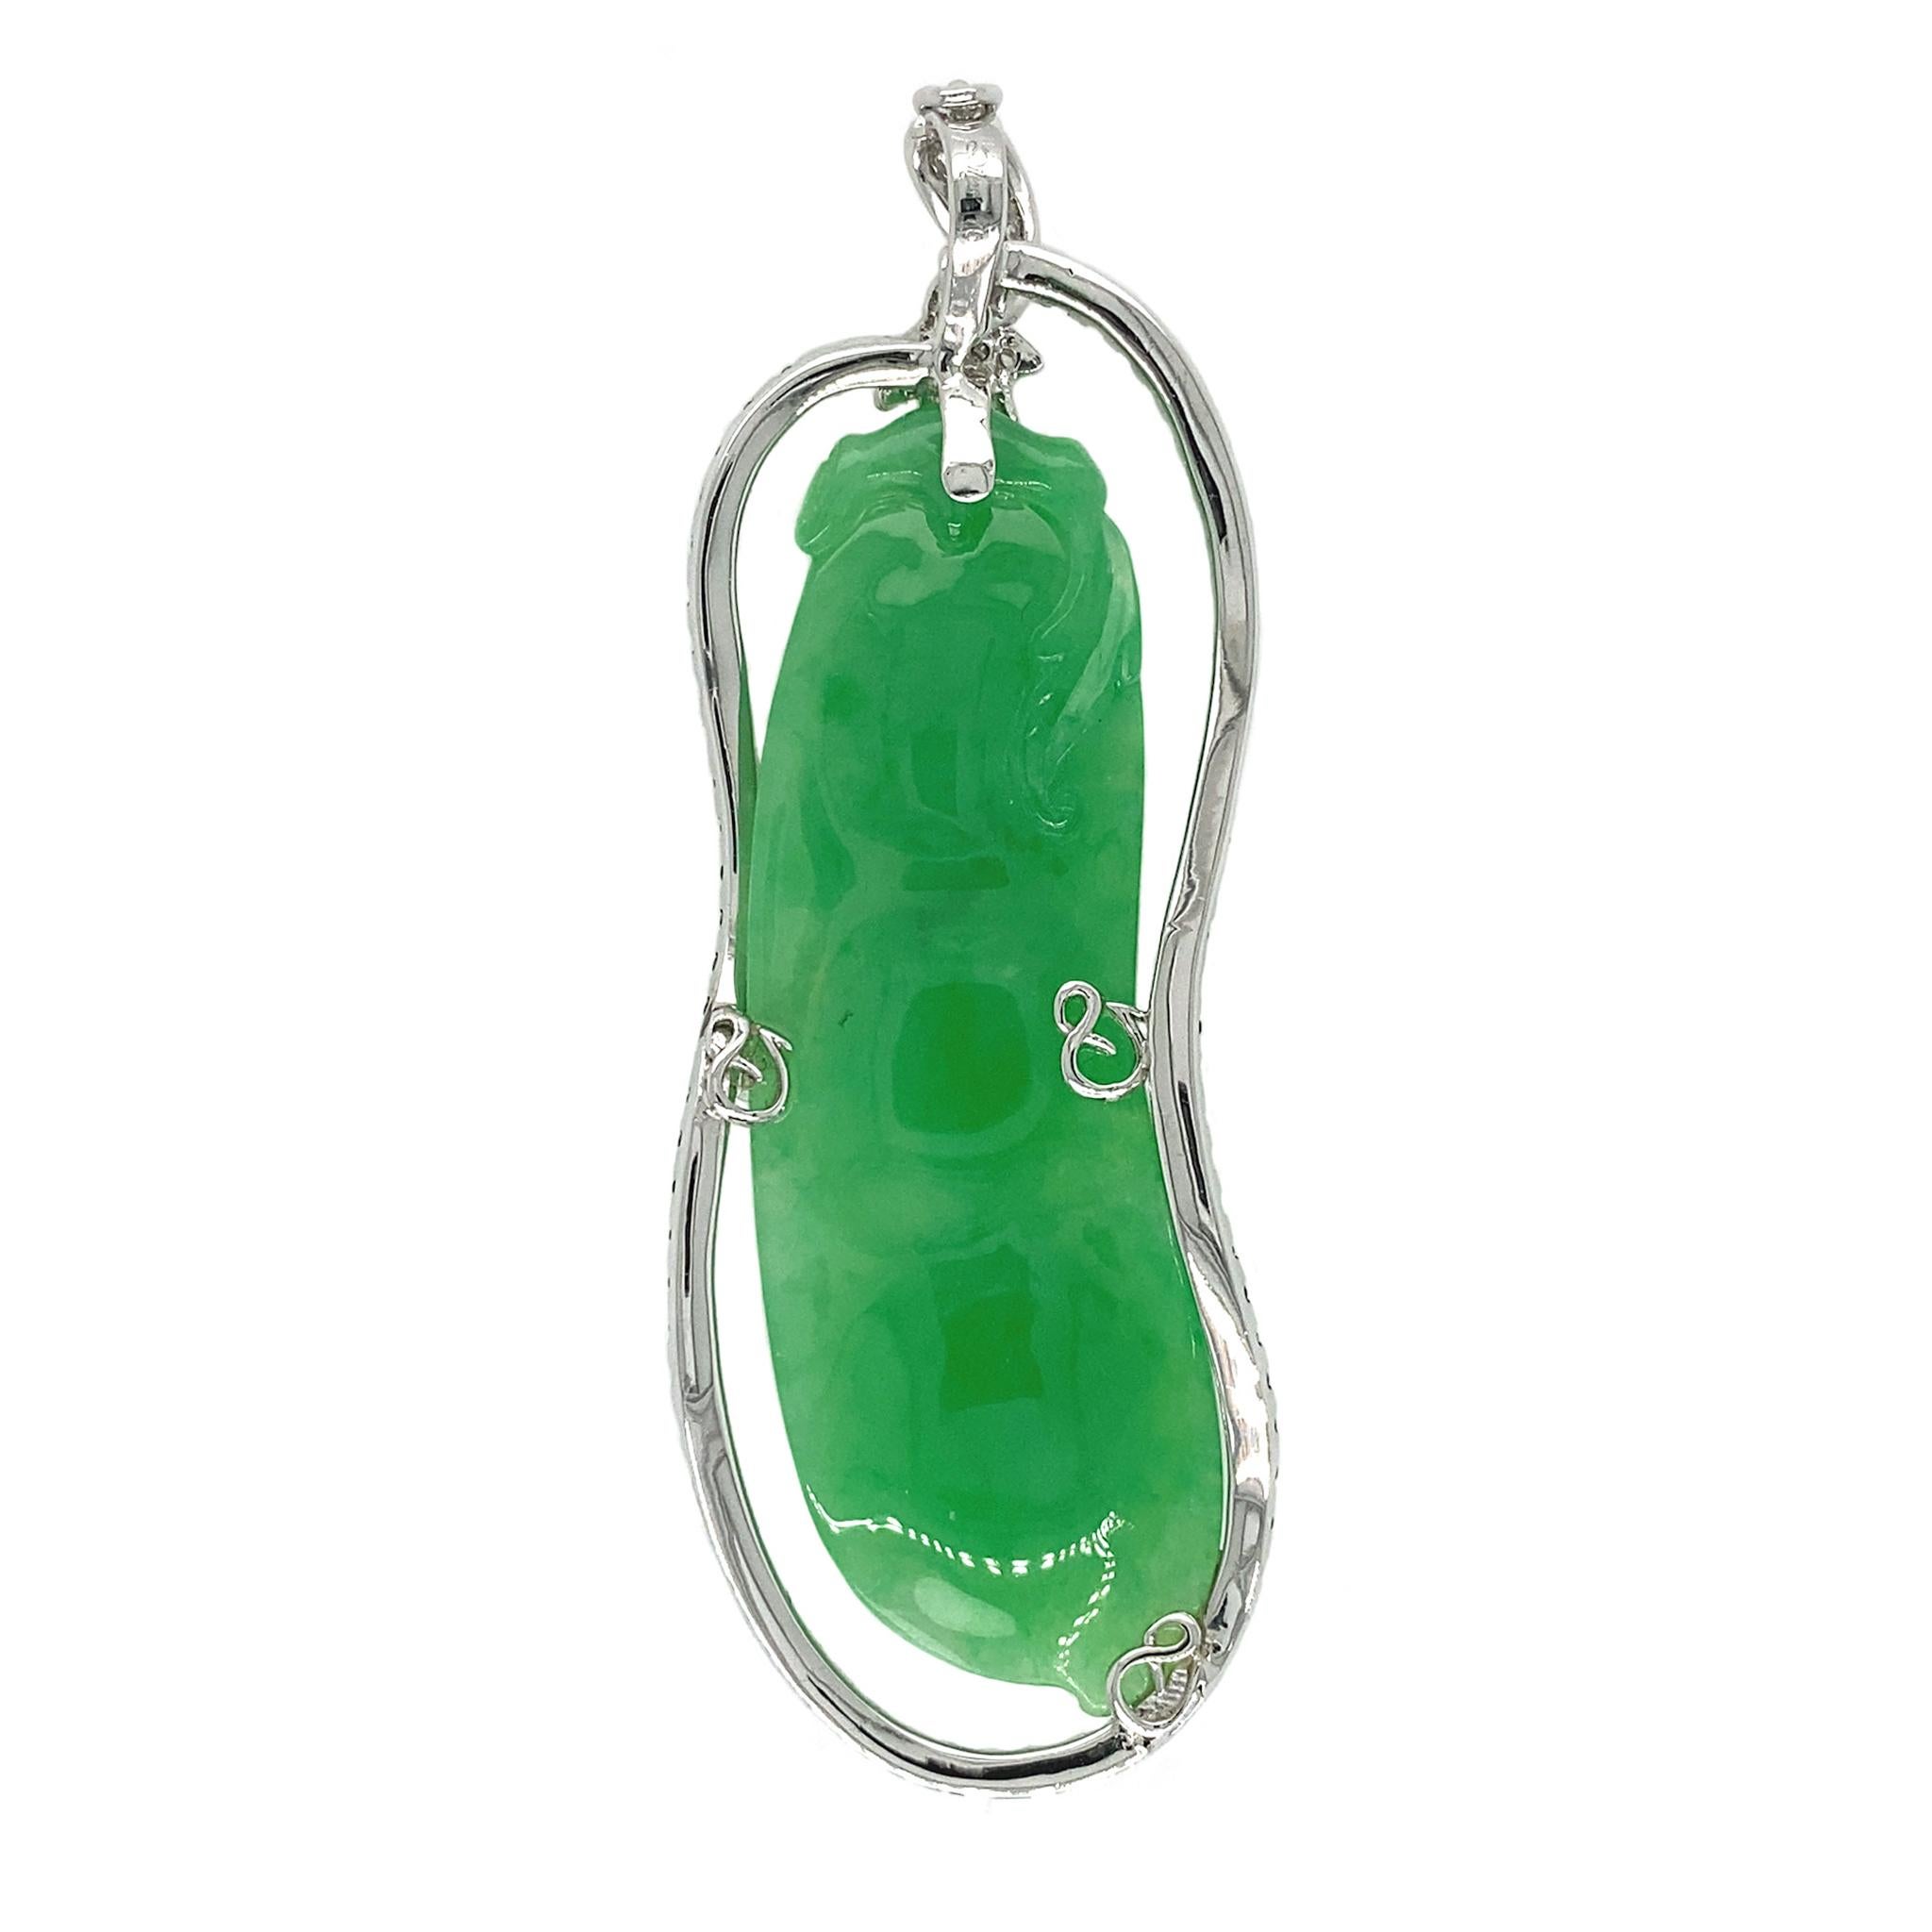 In ancient Jadeite culture, the carved Aubergine carries a few important symbolic interpretations: good health, a long life and promising career growth. This natural A-grade, lustrous green jaidete carving, weighing 21.73 carats and certified by